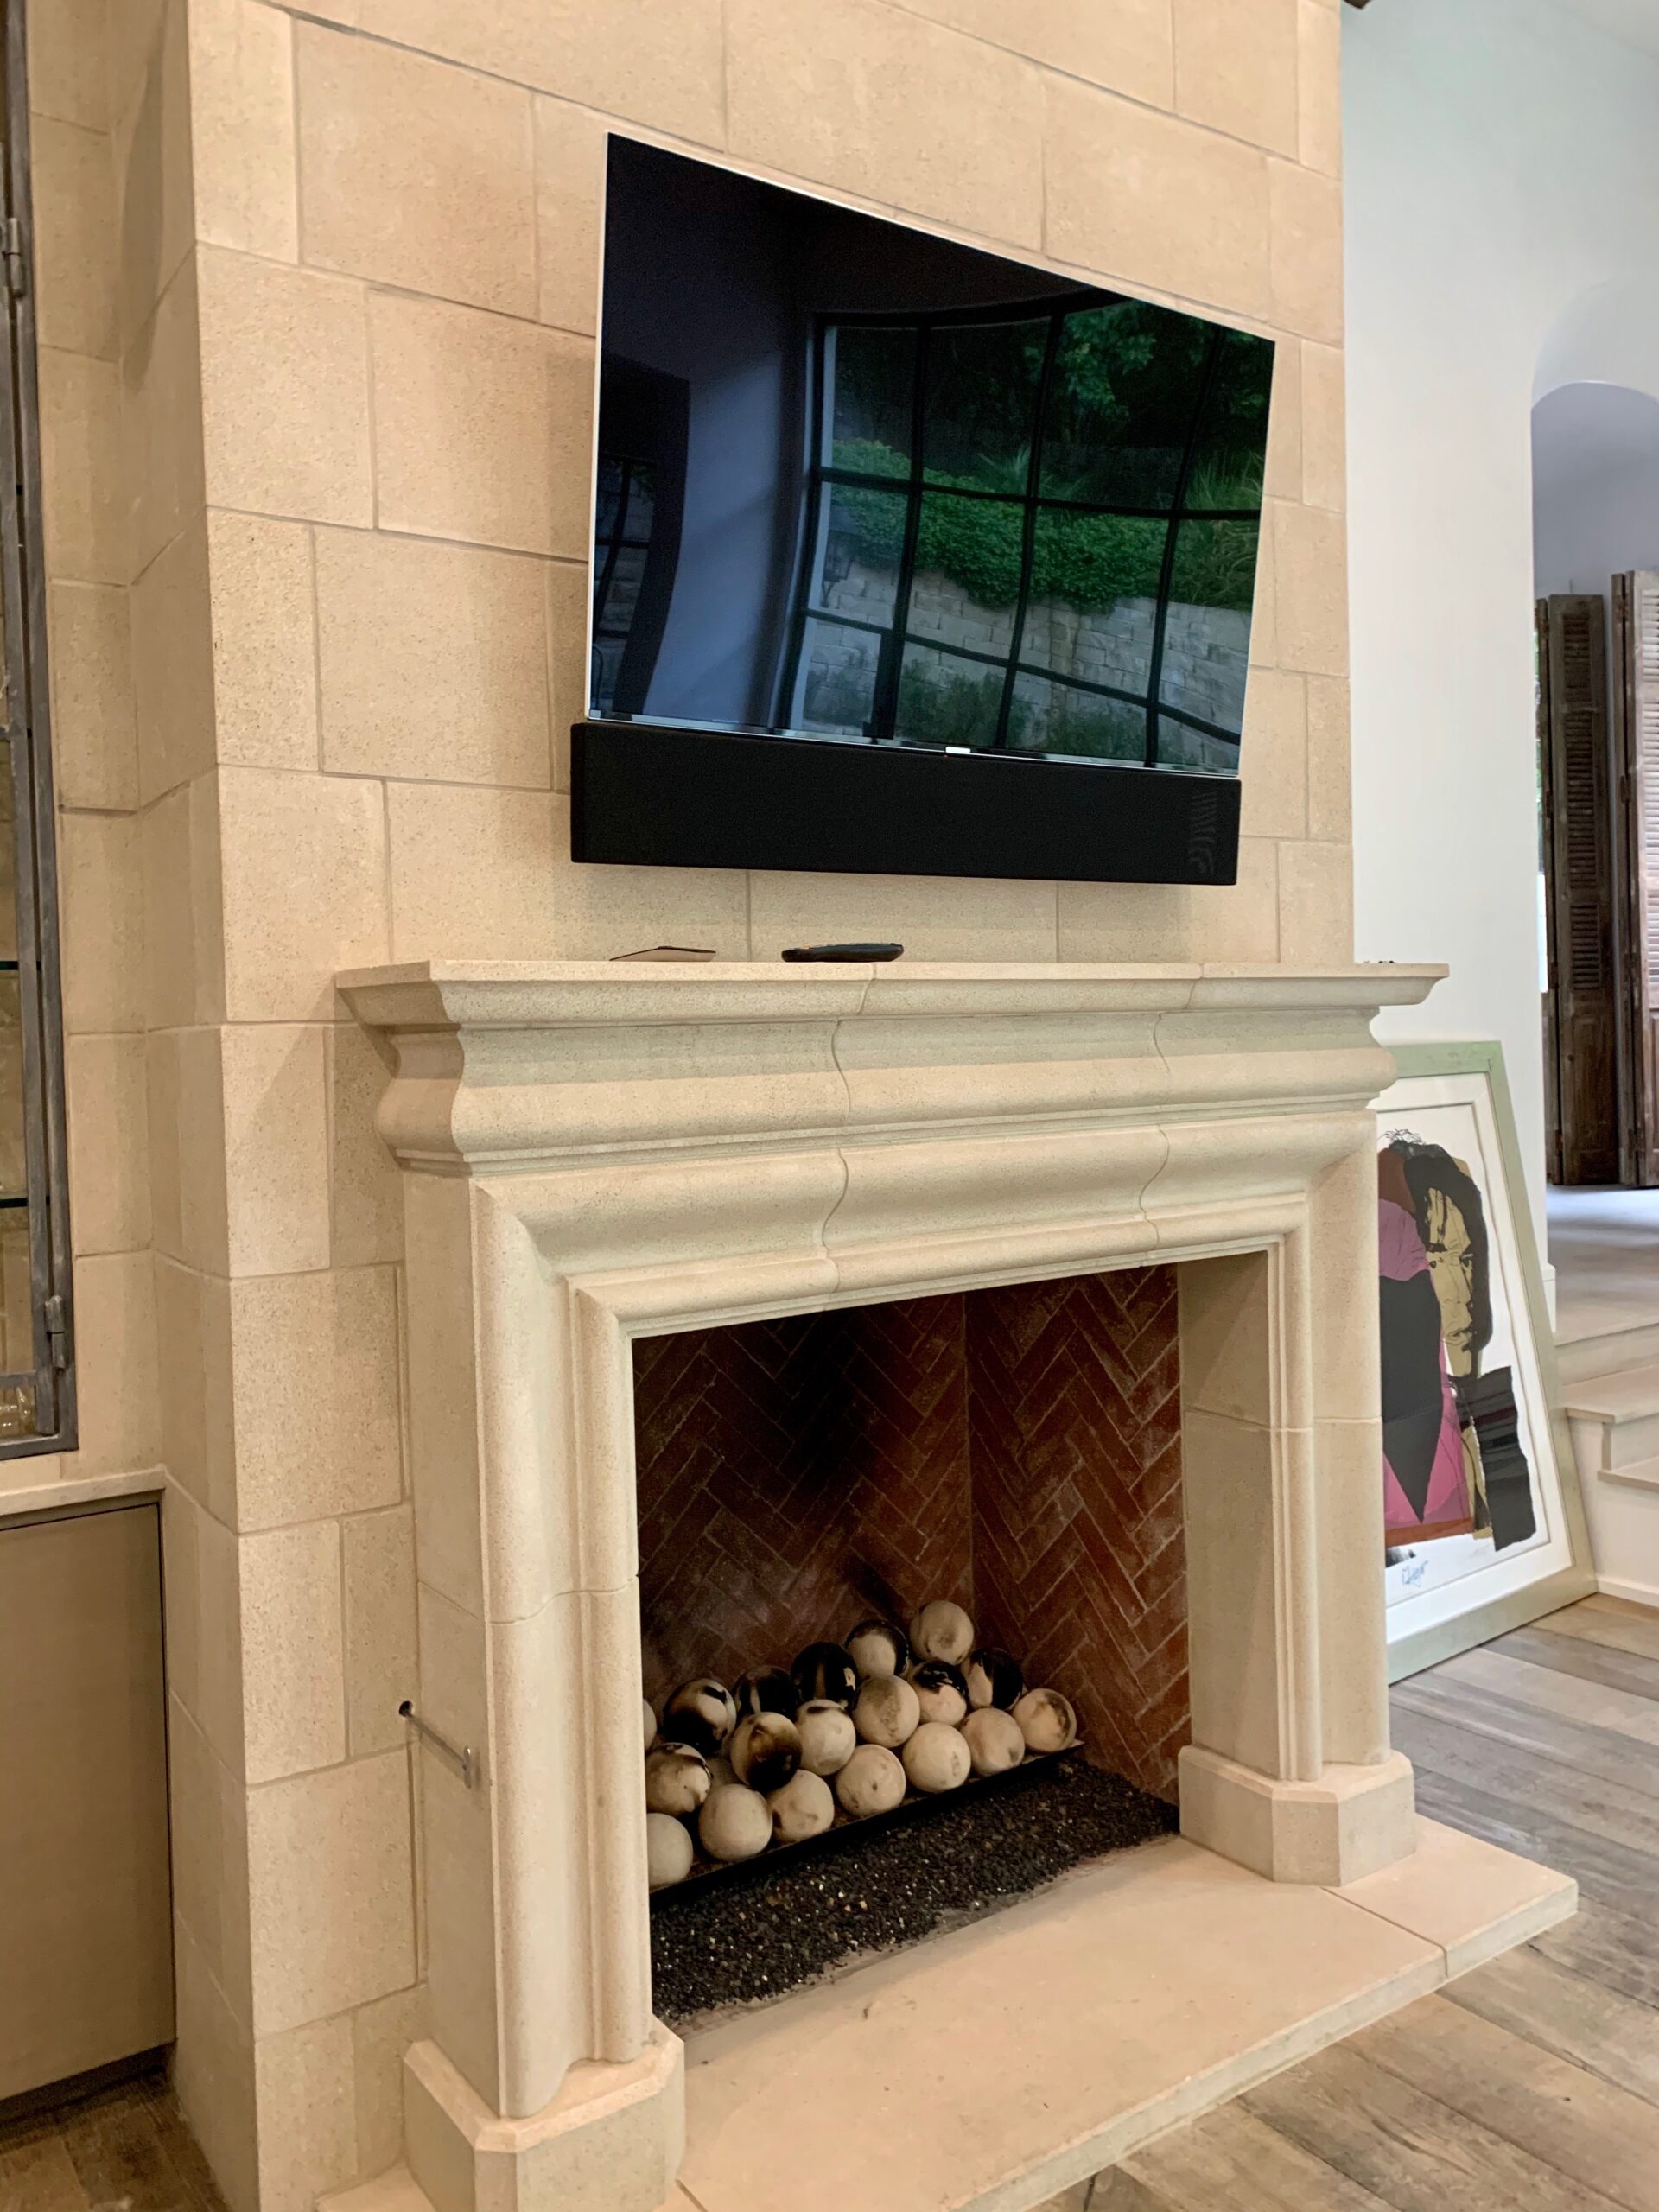 Thin flat screen TV products installed above fireplace